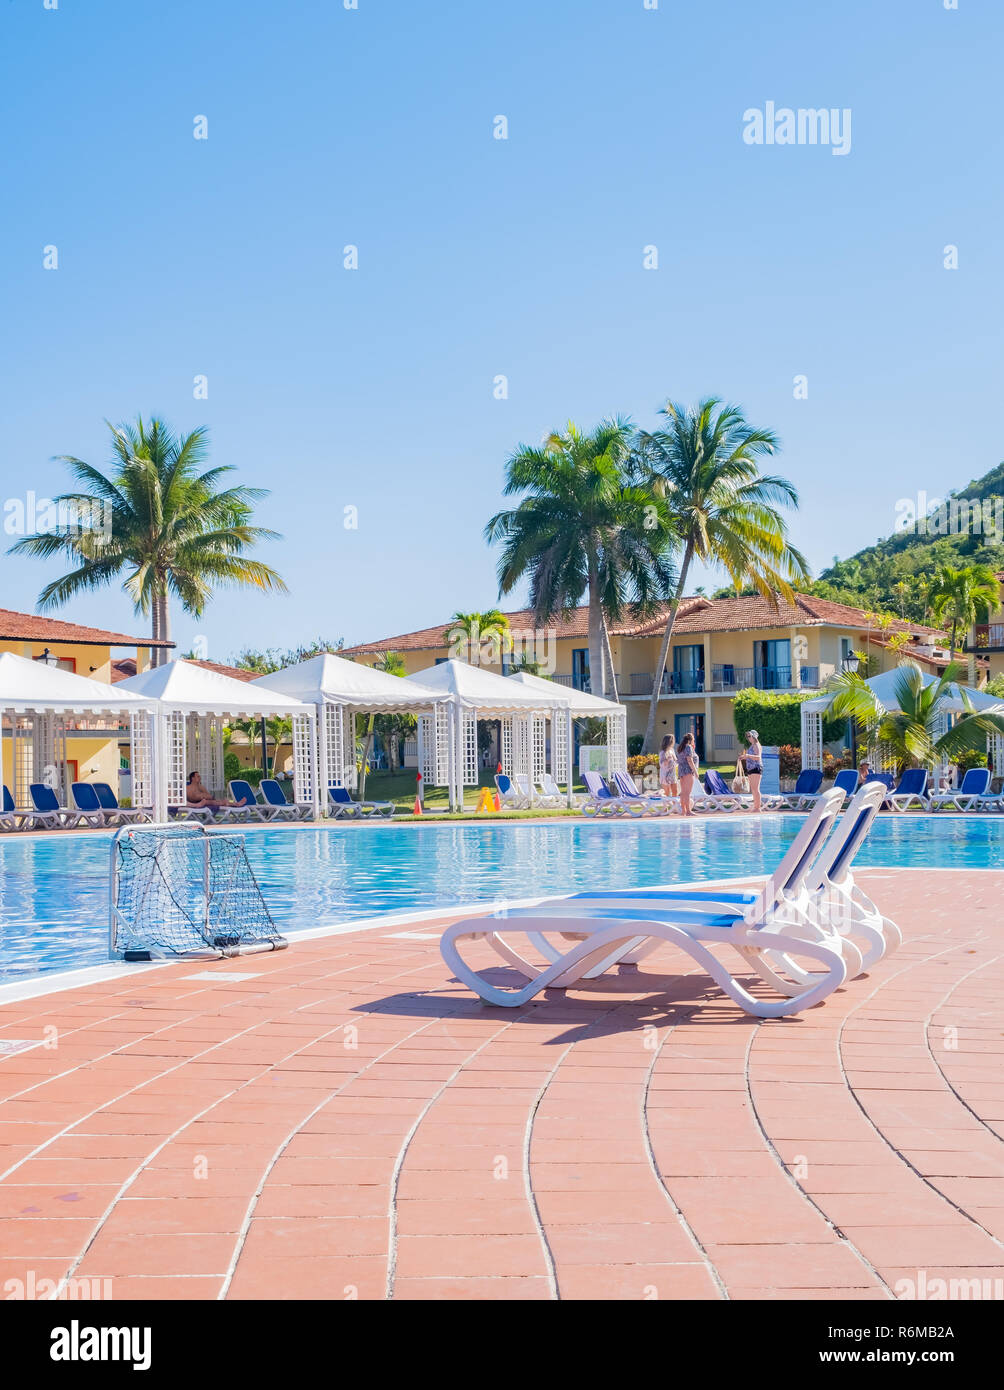 Two blue lounge chars beside a pristine beautiful swimming pool at a resort in Cuba, Stock Photo